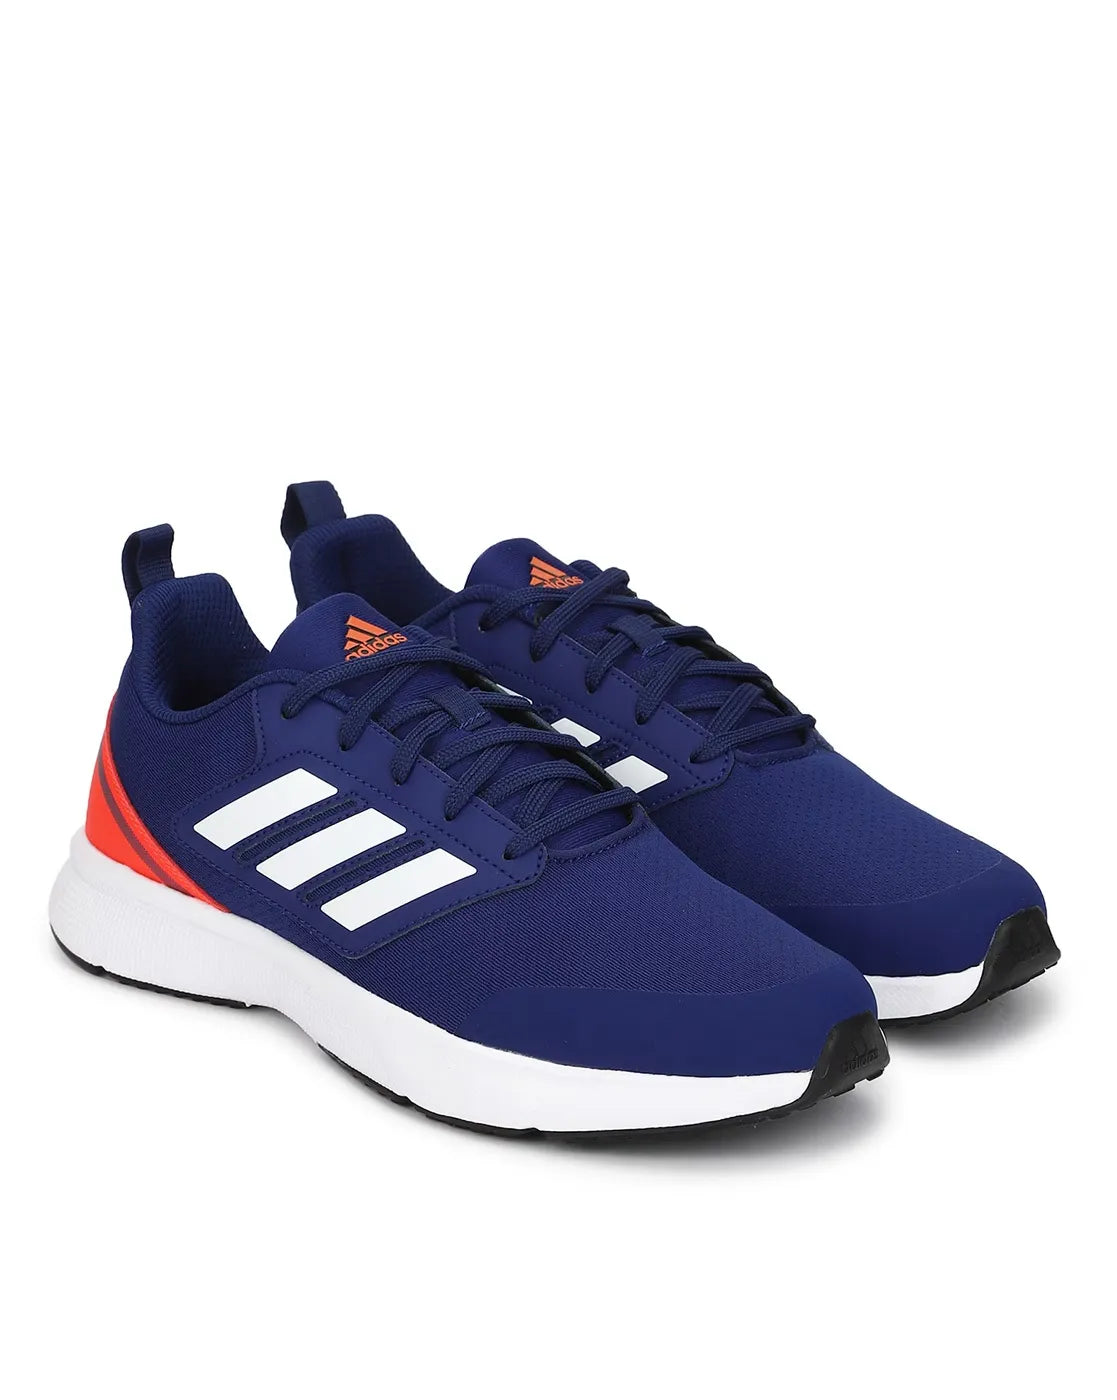 Adidas Stunicon Running Shoes for Men, offering comfort and performance for runners.